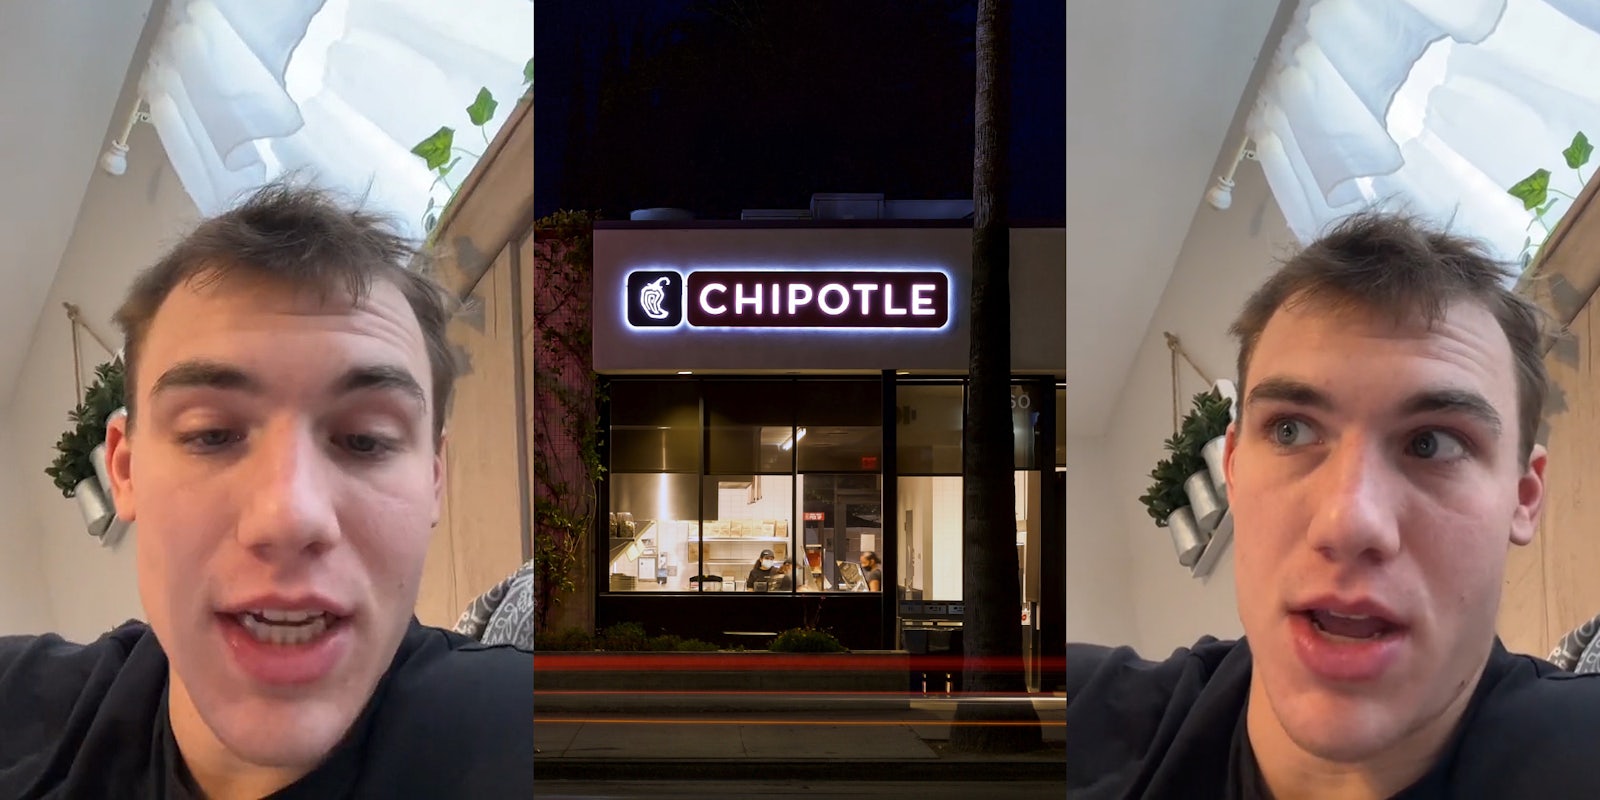 man speaking in bed (l) Chipotle building with sign at night (c) man speaking on bed (r)